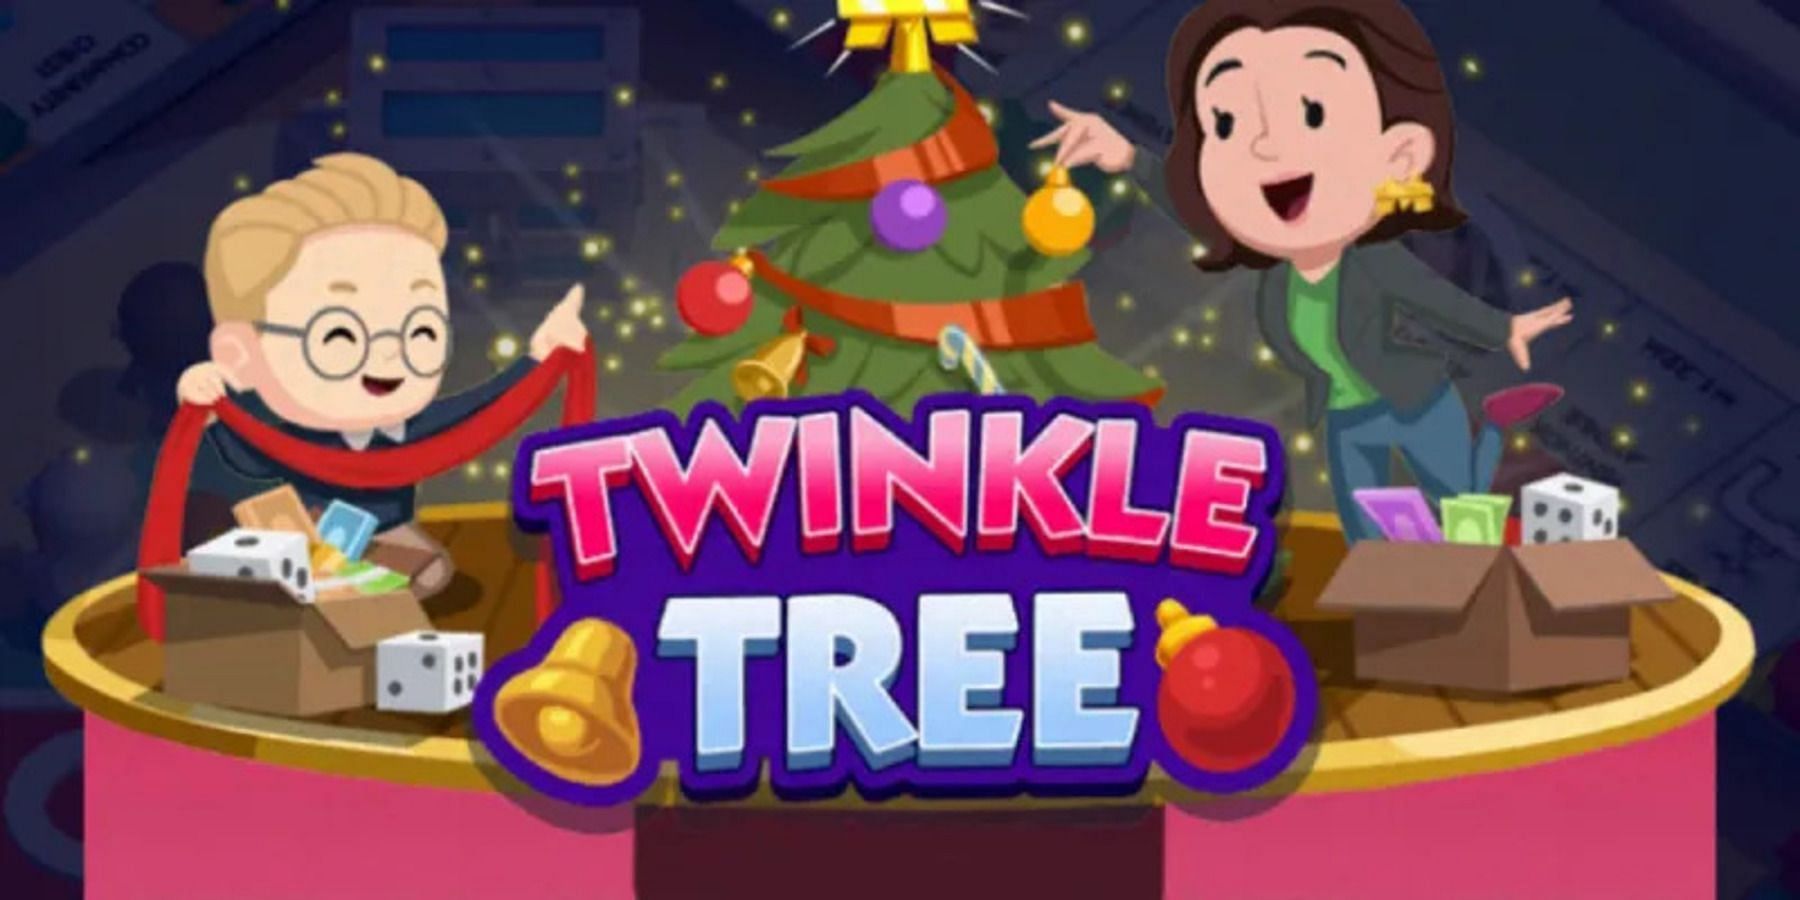 Twinkle Tree event in Monopoly Go